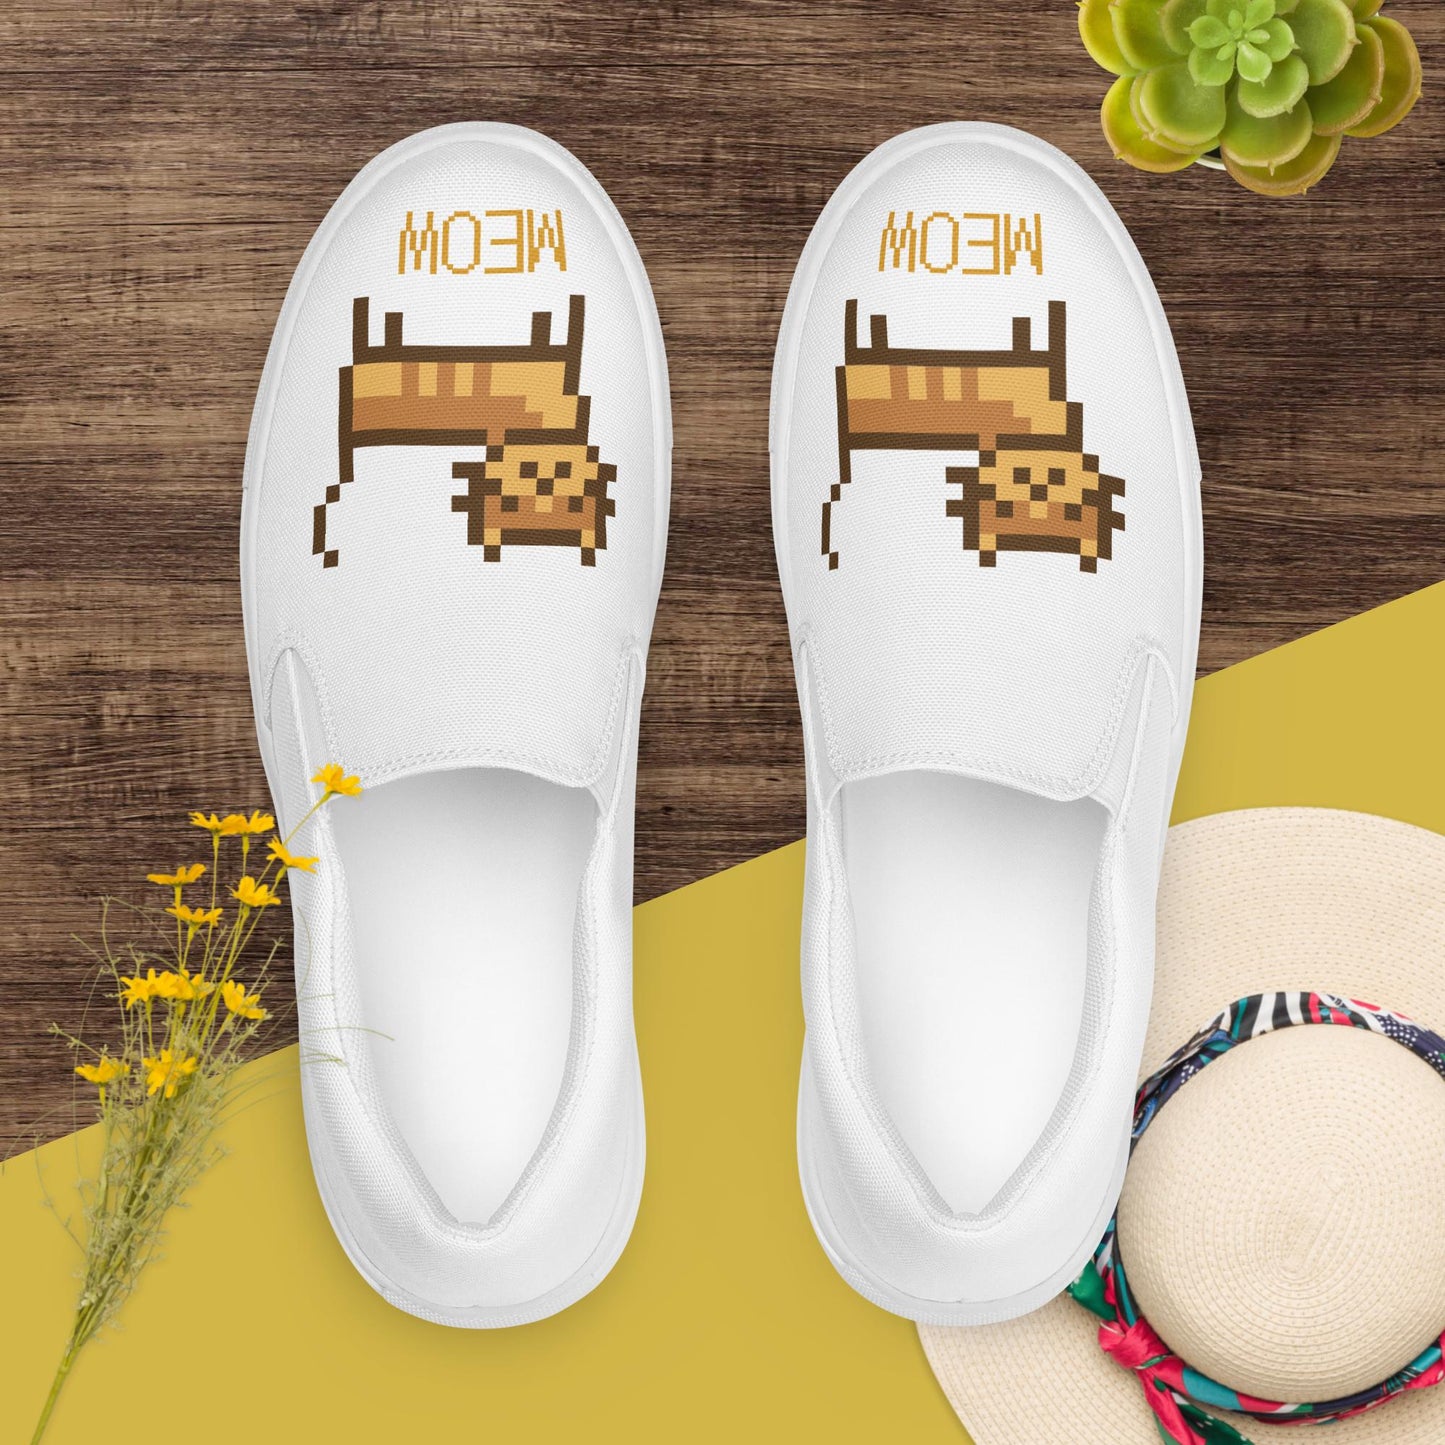 Meow Meow Women’s Slip-on Canvas Shoes